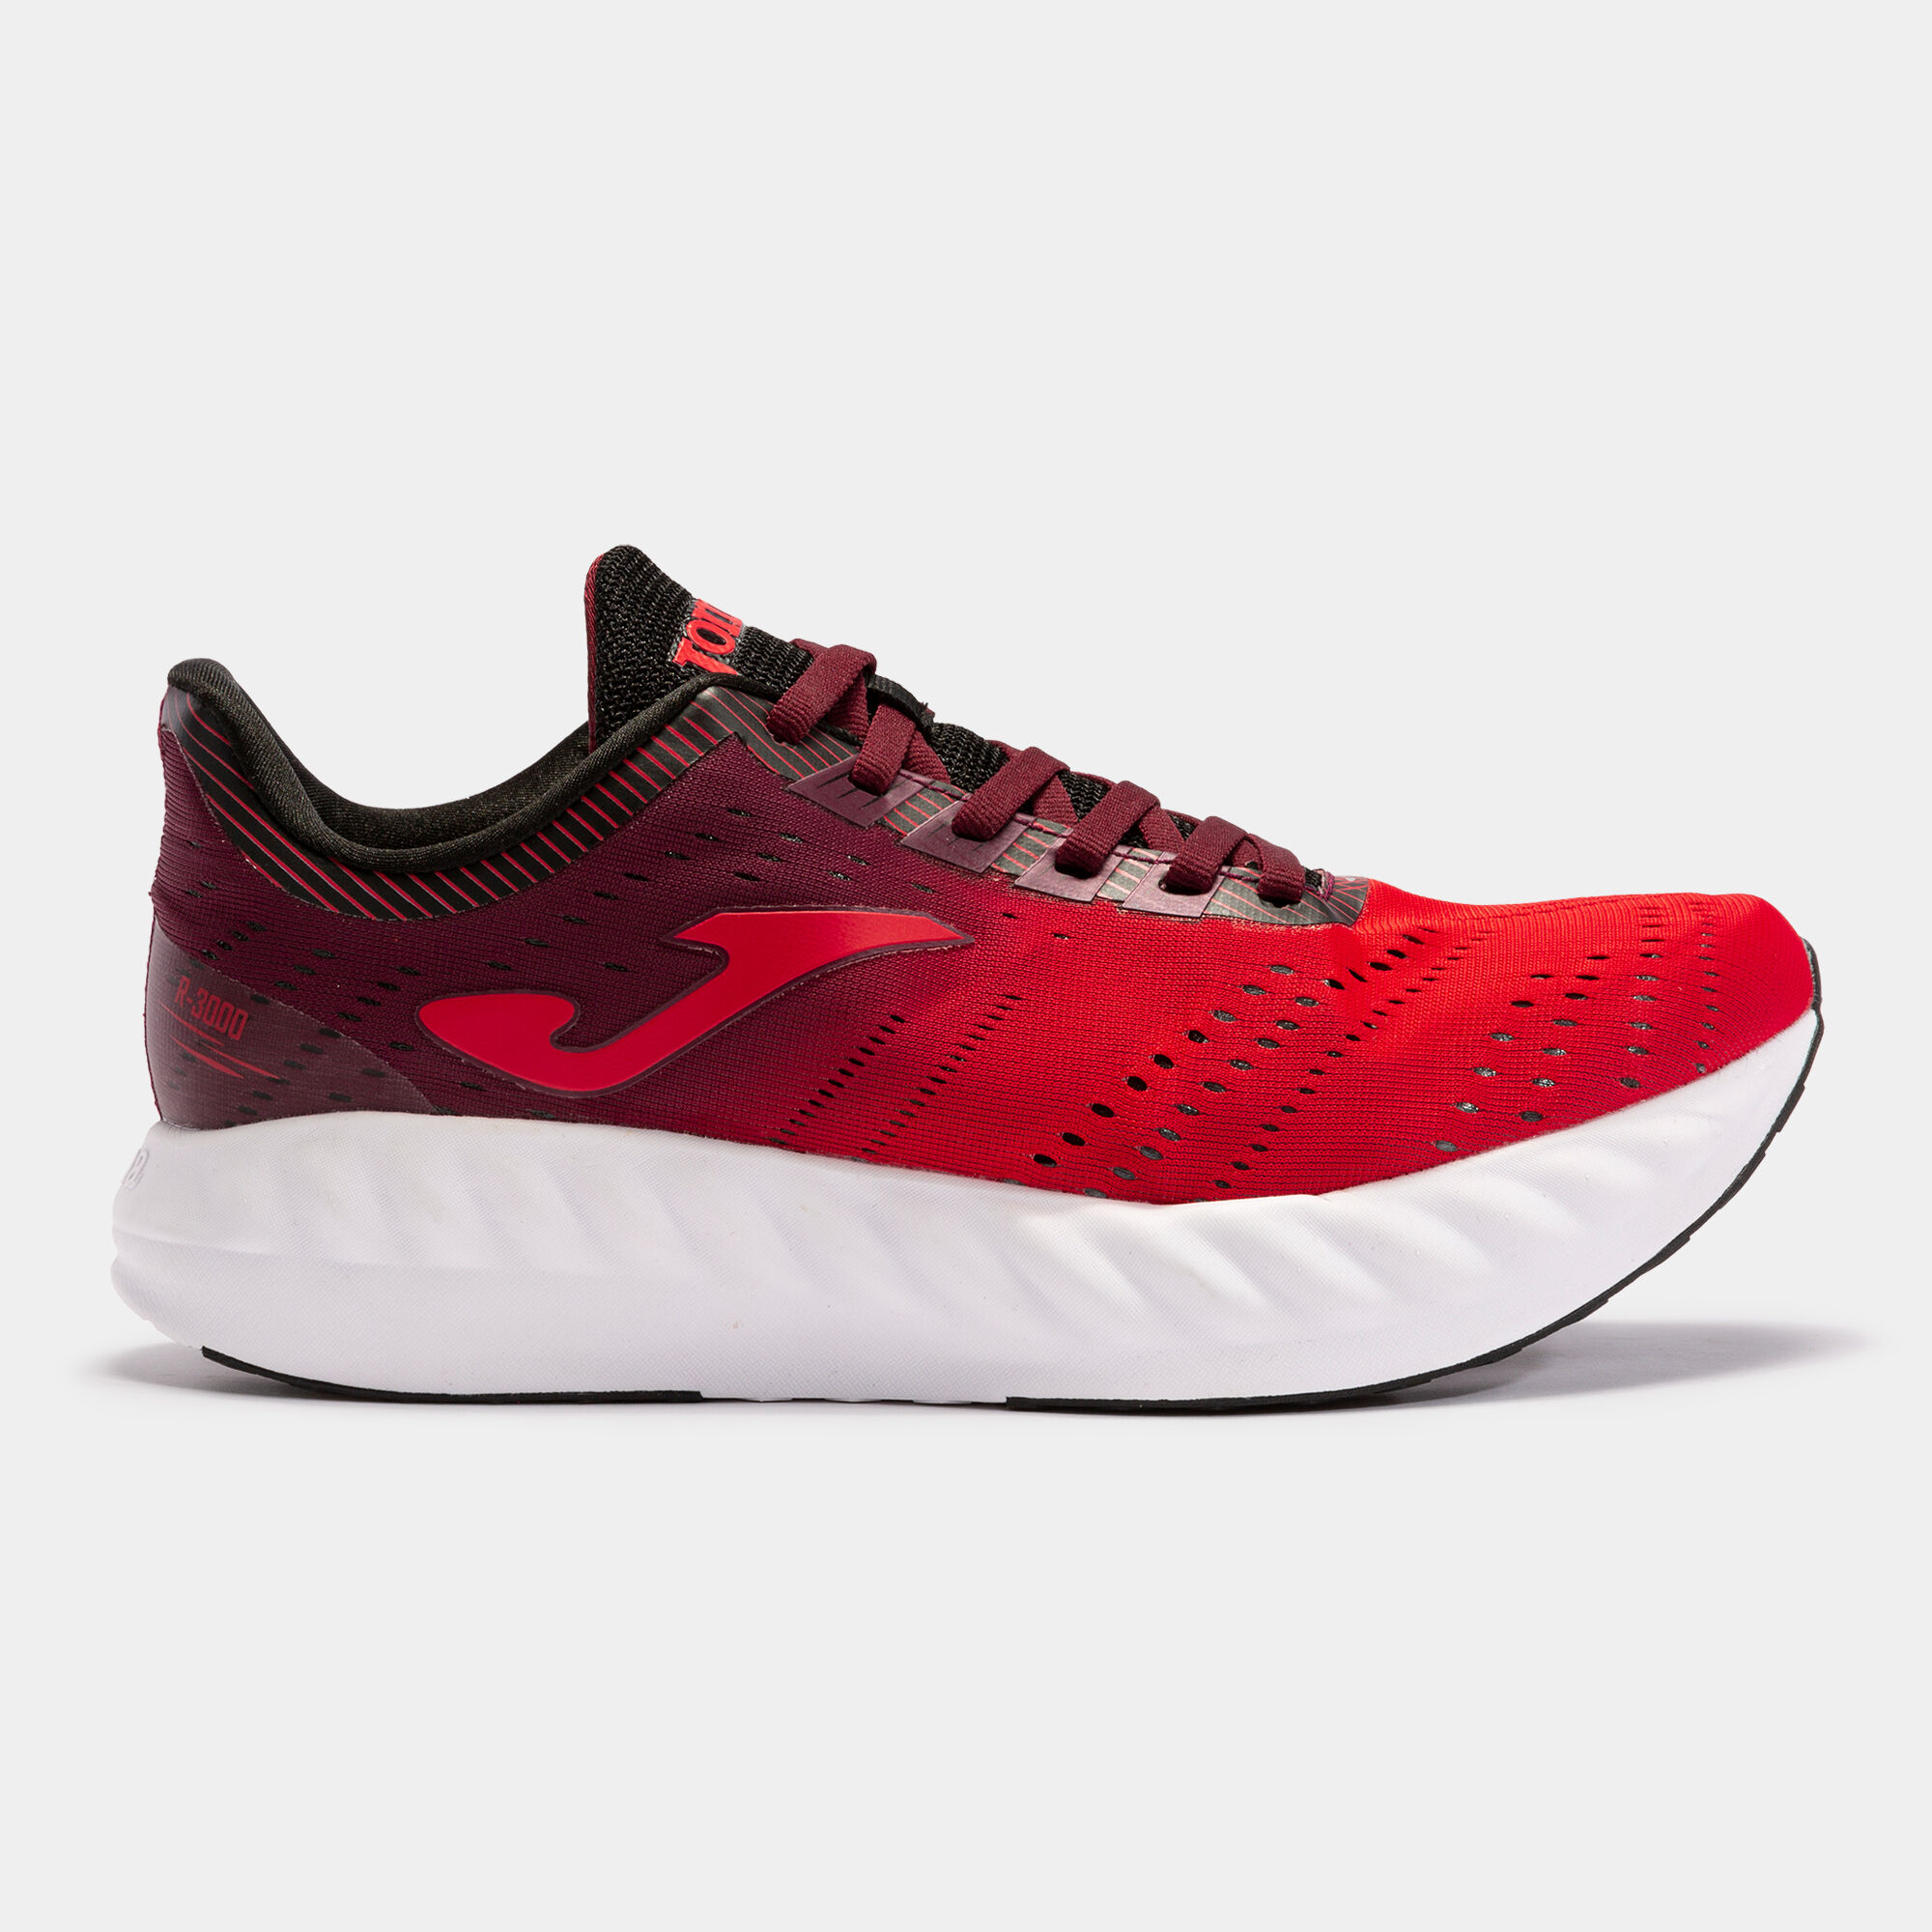 RUNNING SHOES R.3000 21 MAN CORAL BURGUNDY